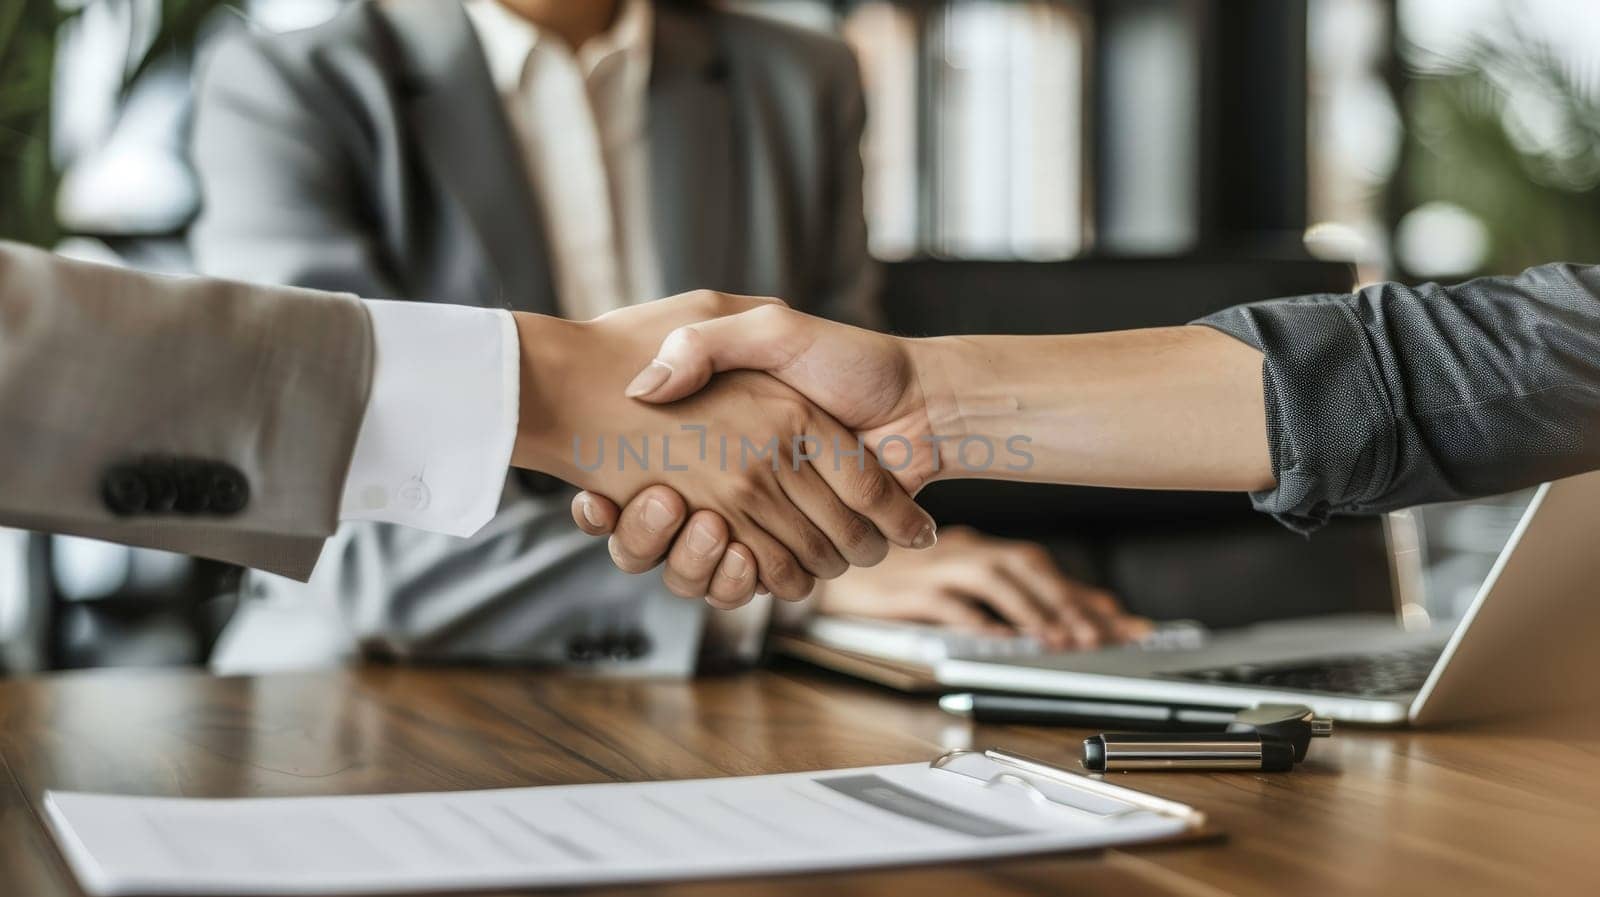 Man employer is shaking hands to congratulate the new employee after successful job interview and signing the contract.